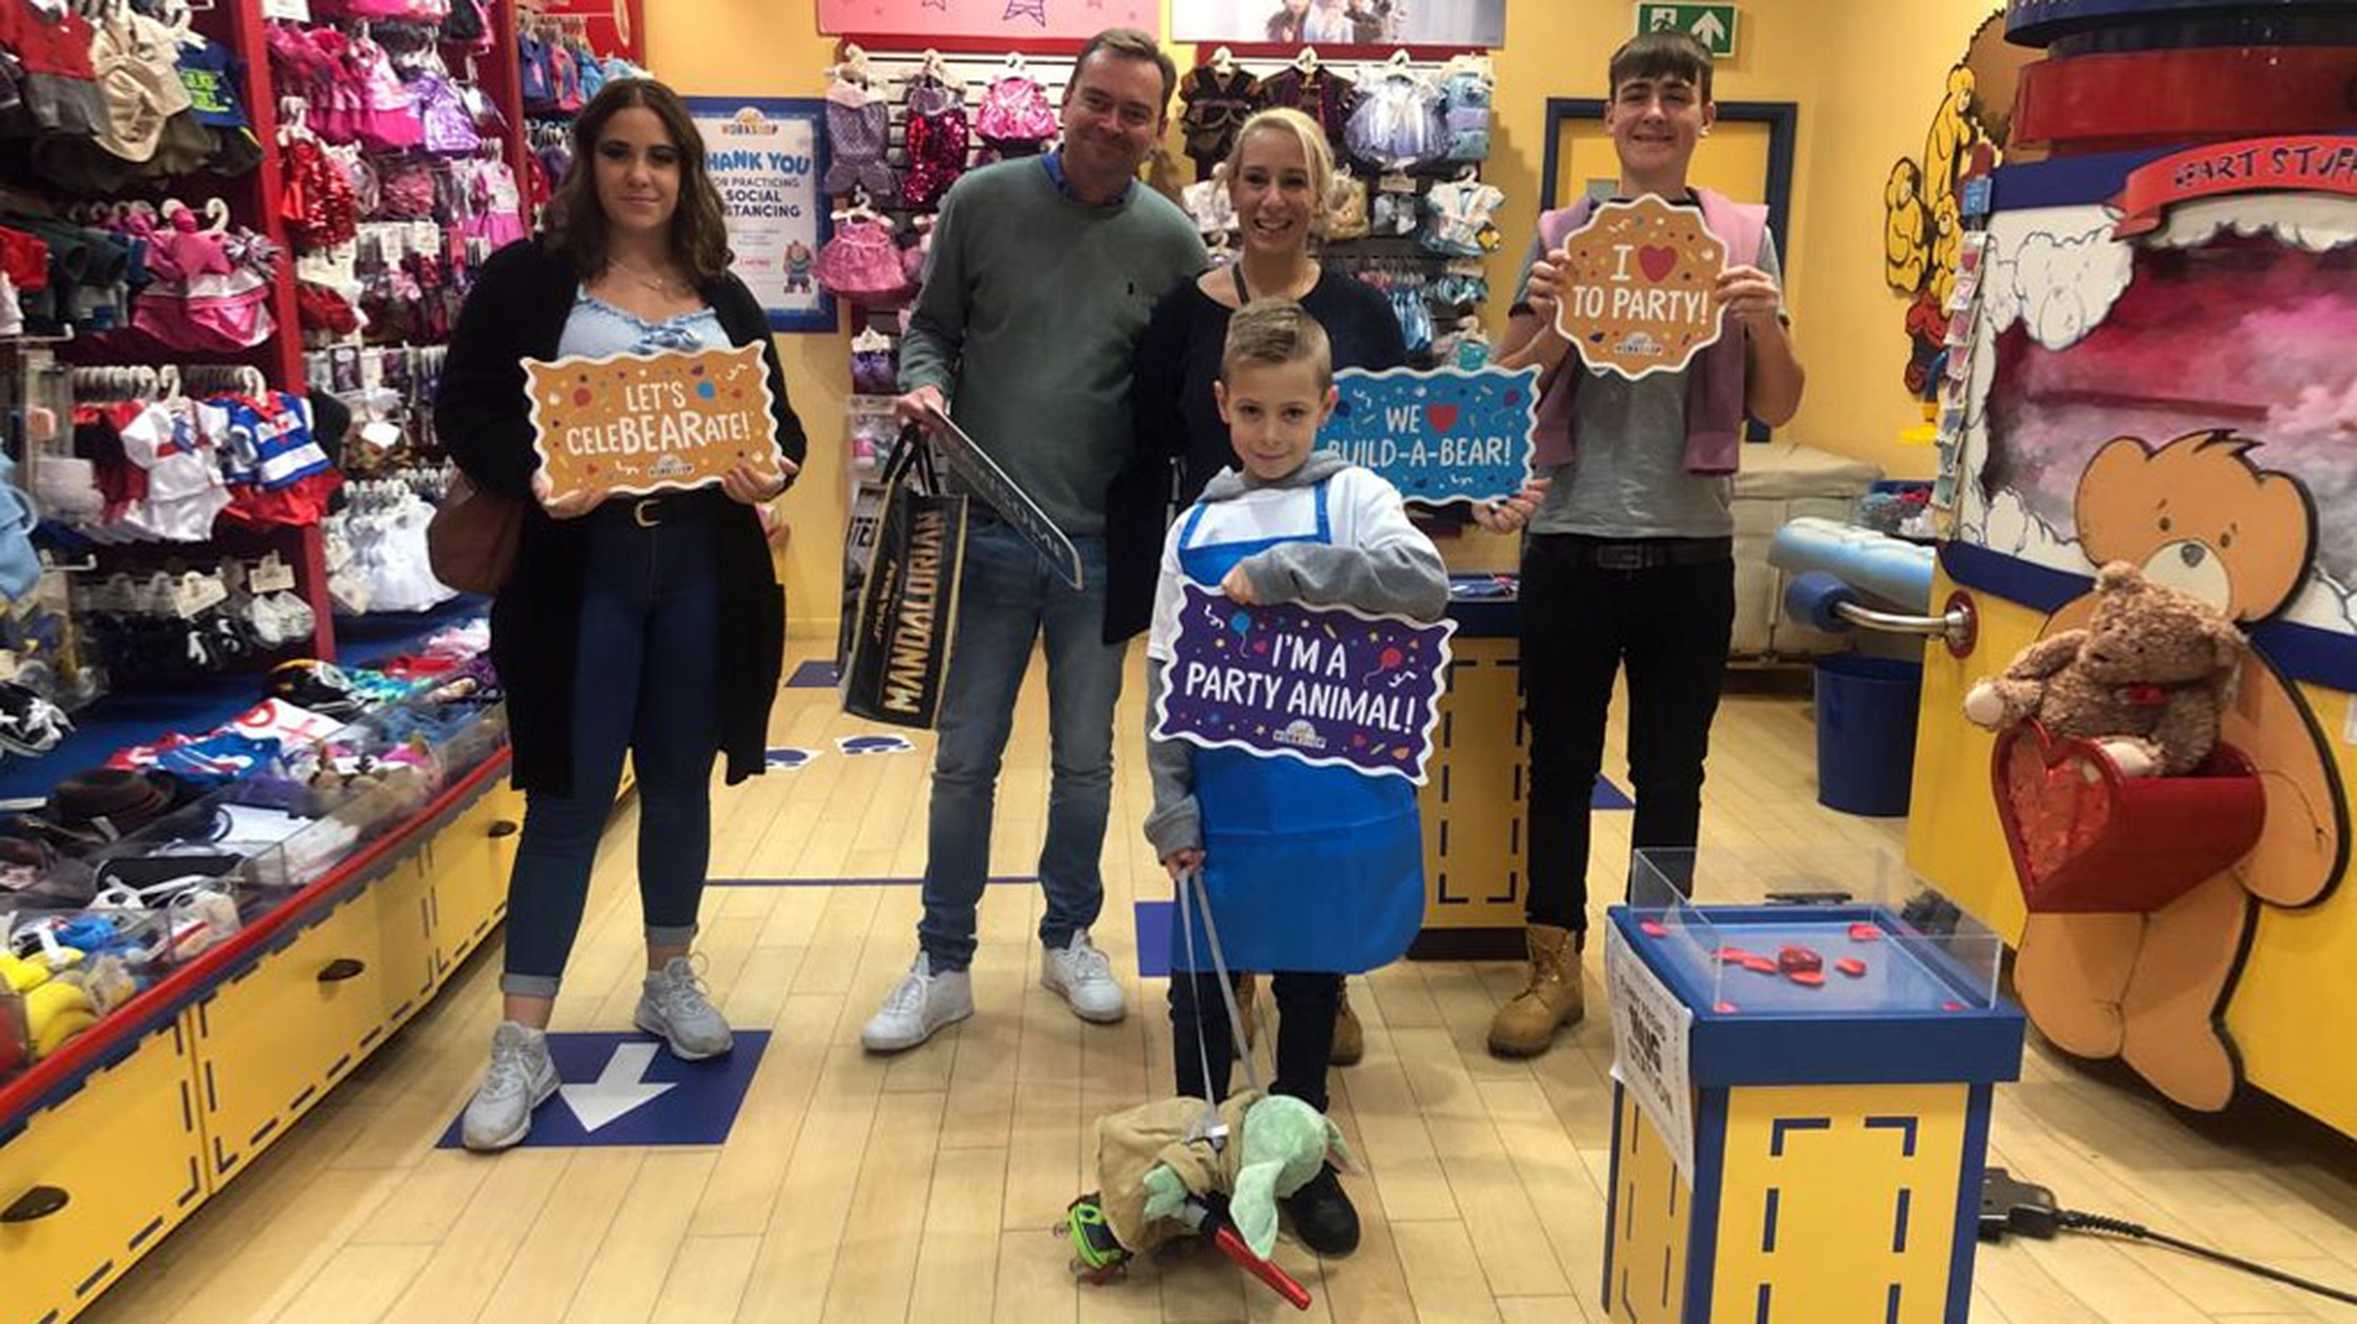 Alfie and his family posing with signs in one of the shops during his shopping spree.